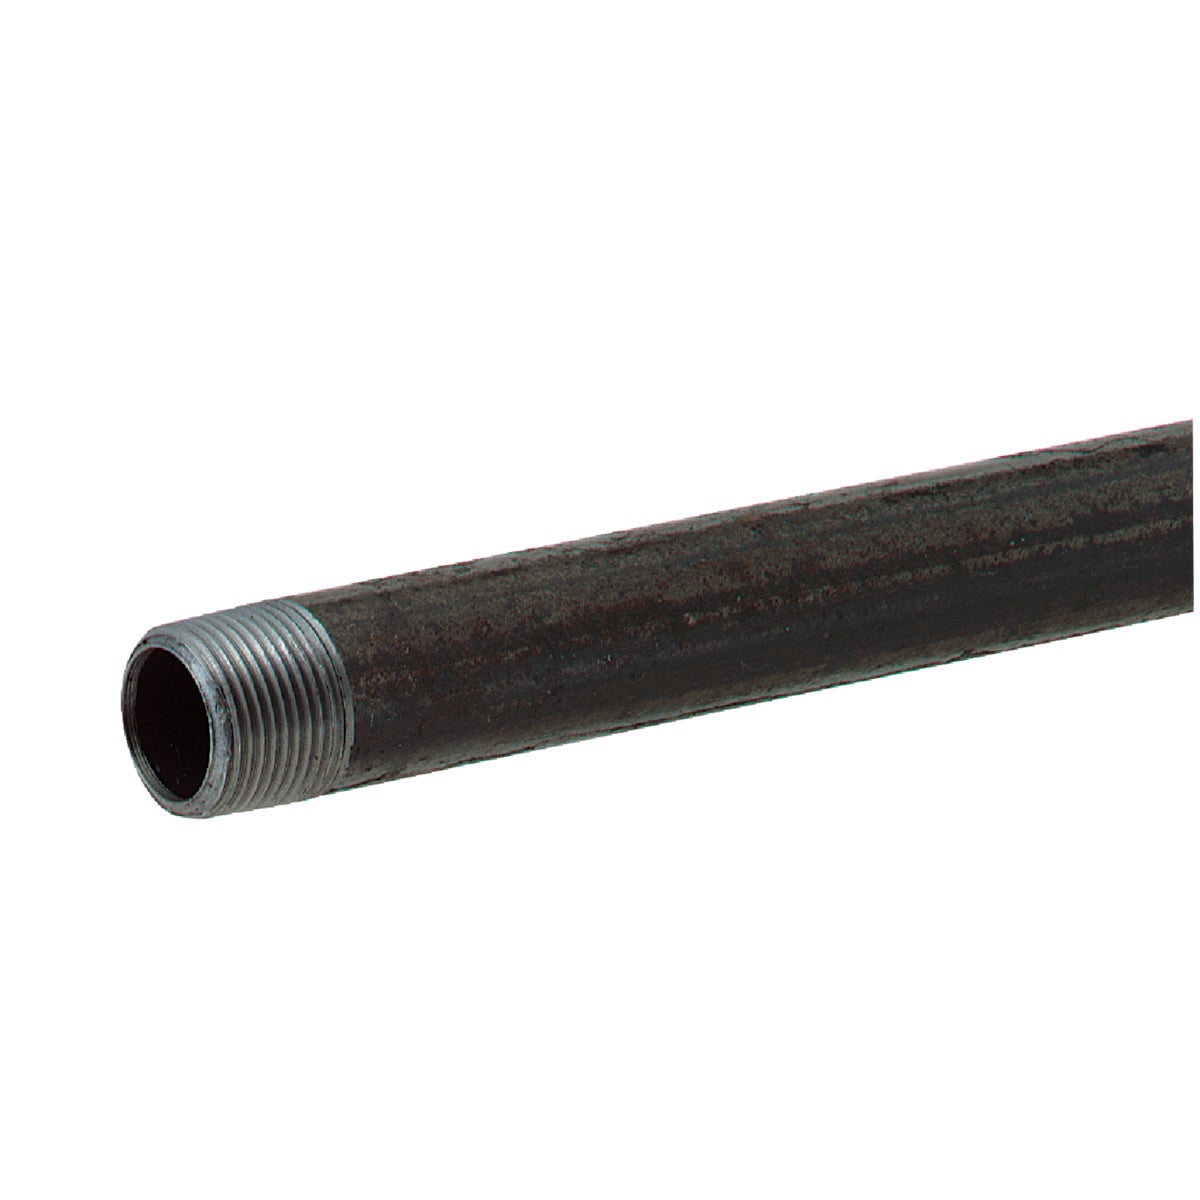 Southland 1-1/2 In. x 48 In. Carbon Steel Threaded Black Pipe